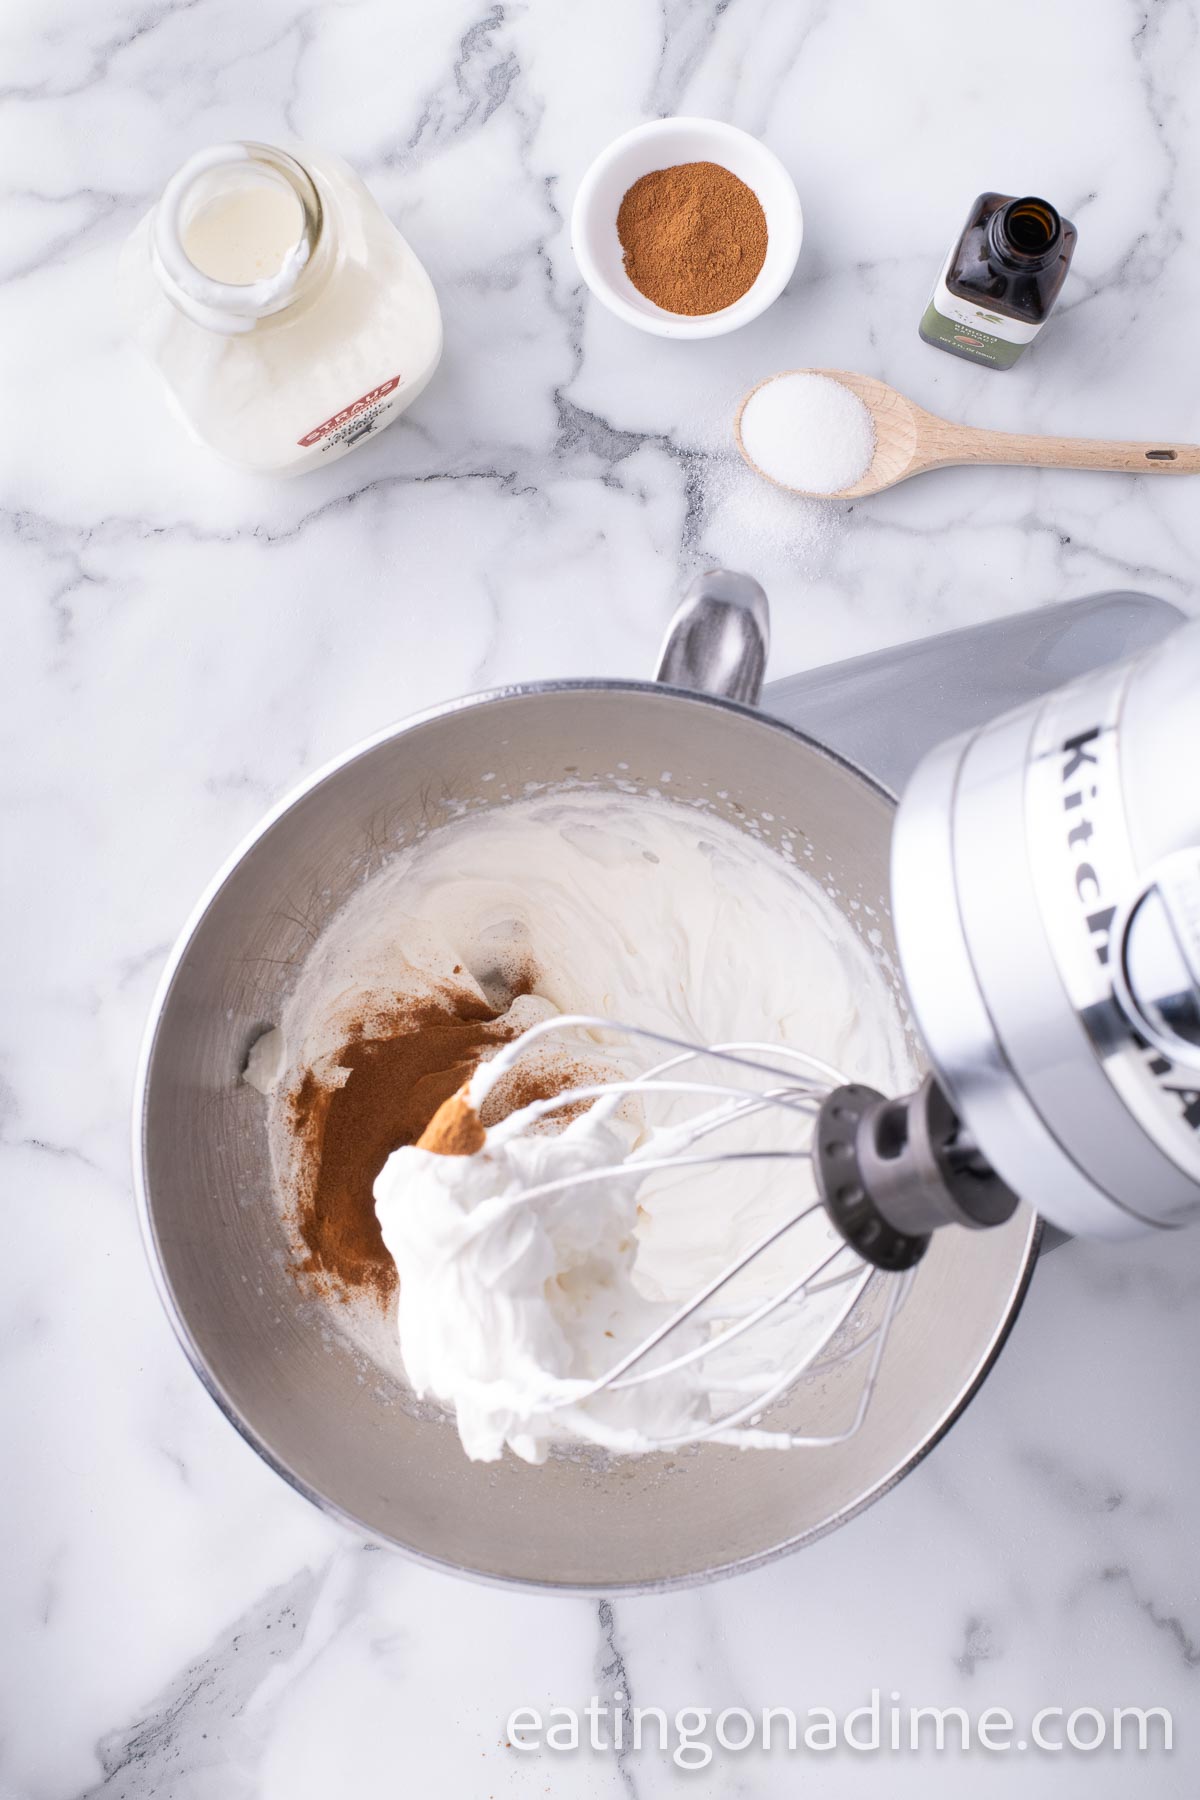 Cuisinart sale: Get our favorite budget-friendly stand mixer for under $180